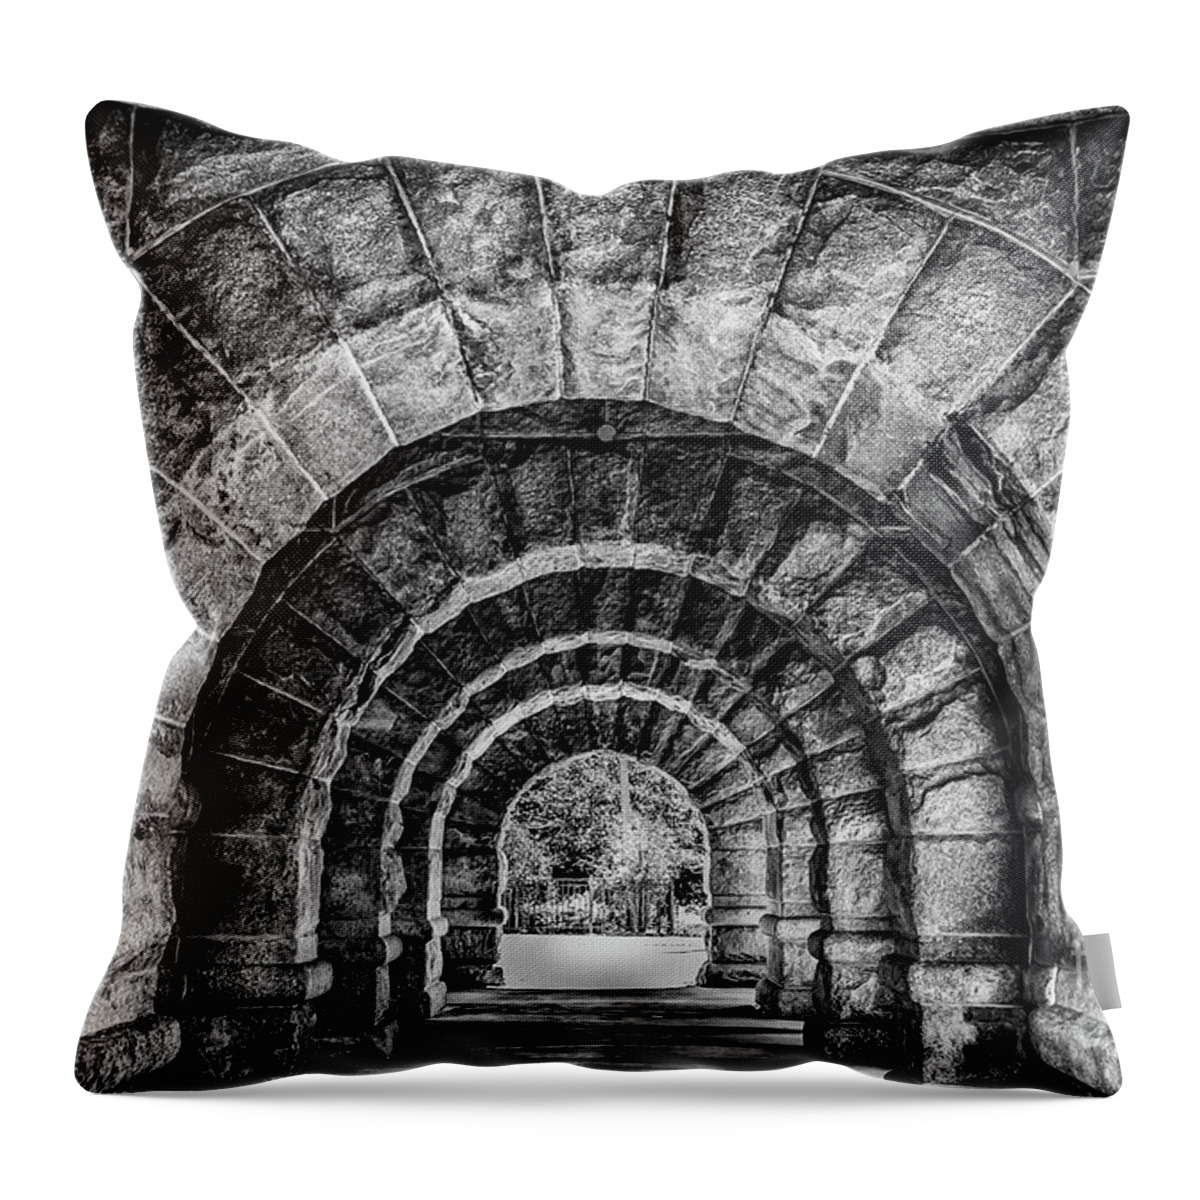 Black And White Throw Pillow featuring the photograph Many Arches by Charles McCleanon